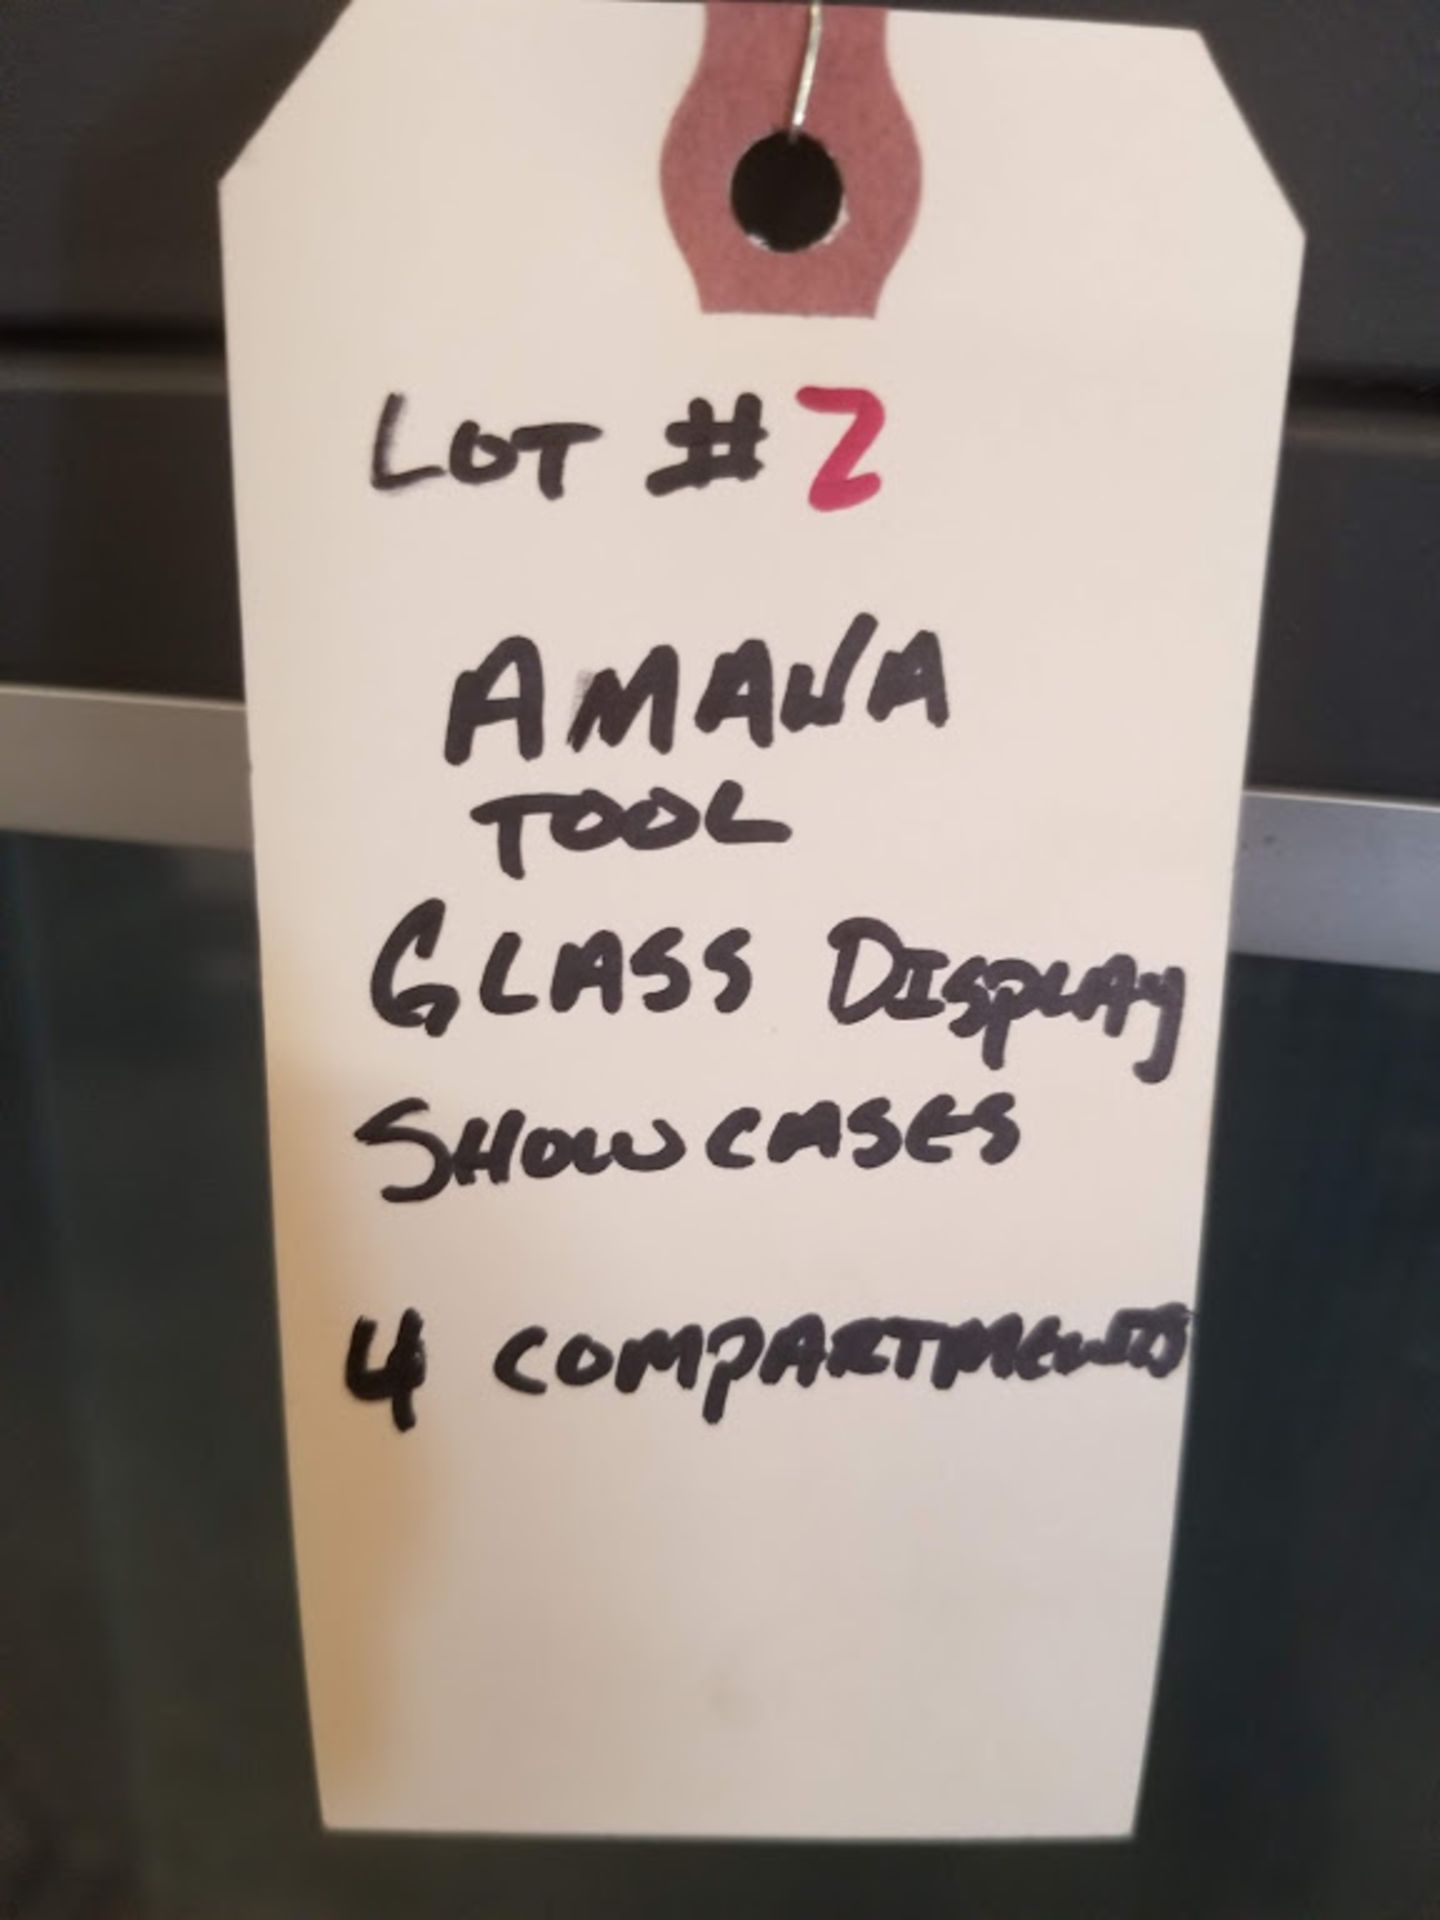 Amana Tool Glass Display Showcases (4 Compartments) - Image 3 of 3